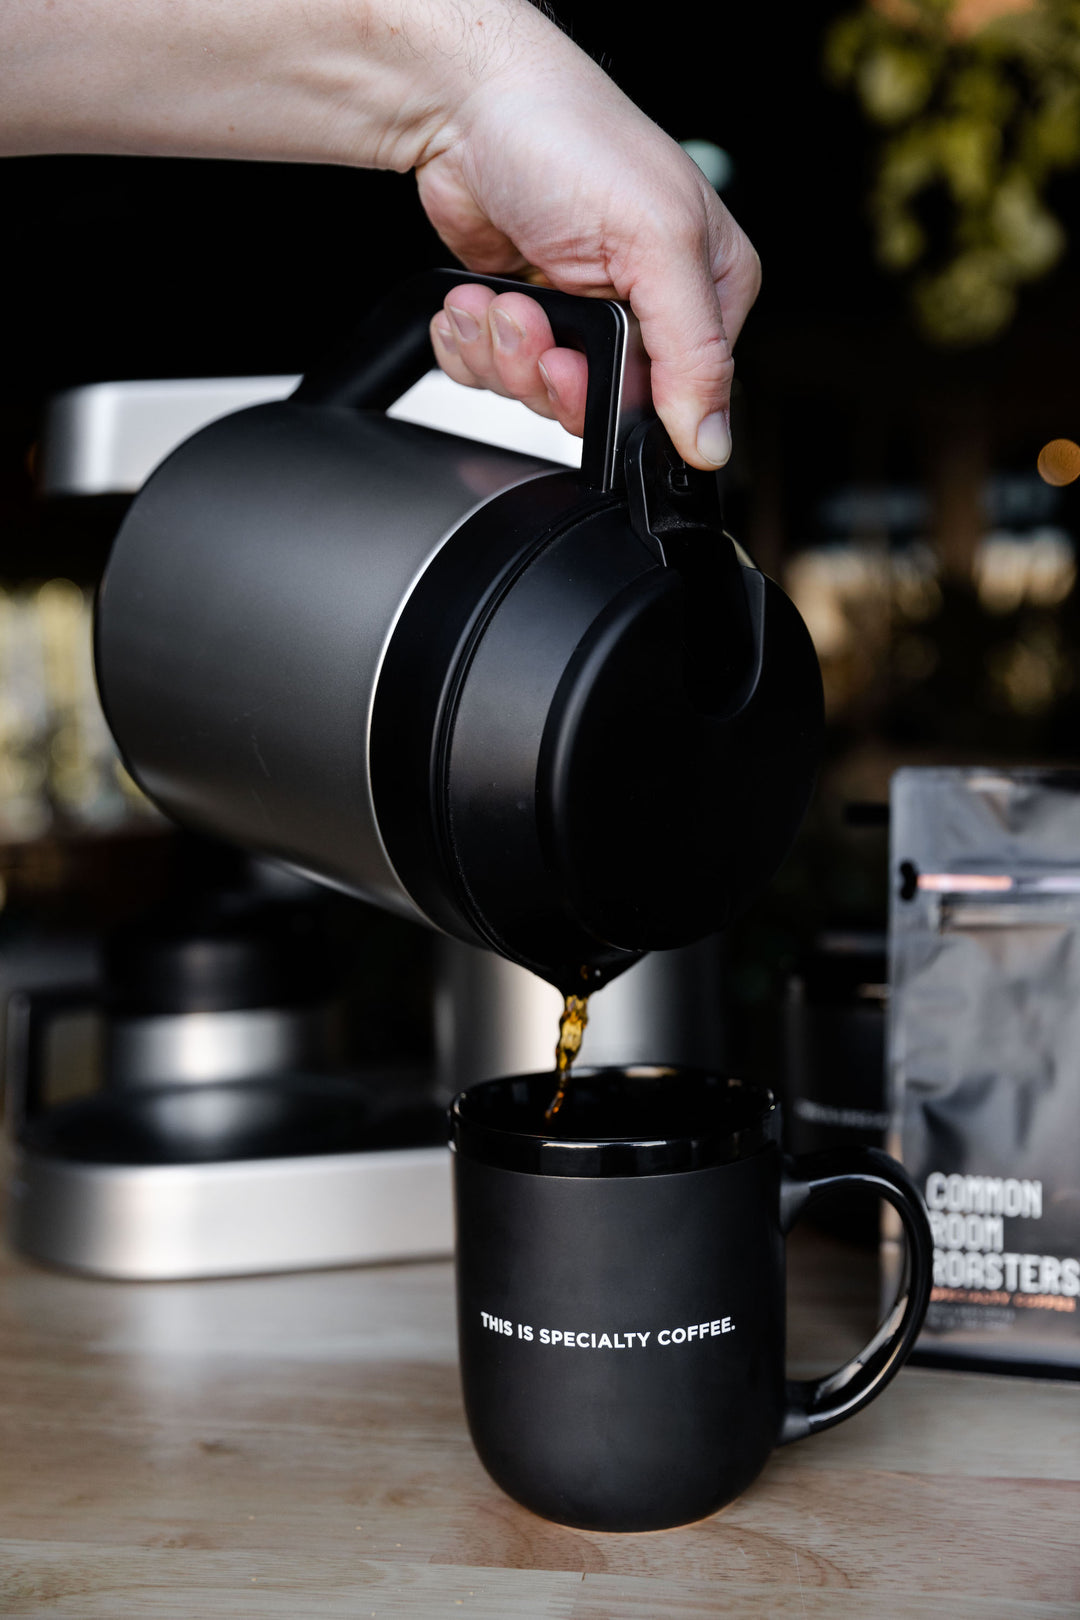 COFFEE BEING SERVED IN THE SPECIALTY COFFEE MUG